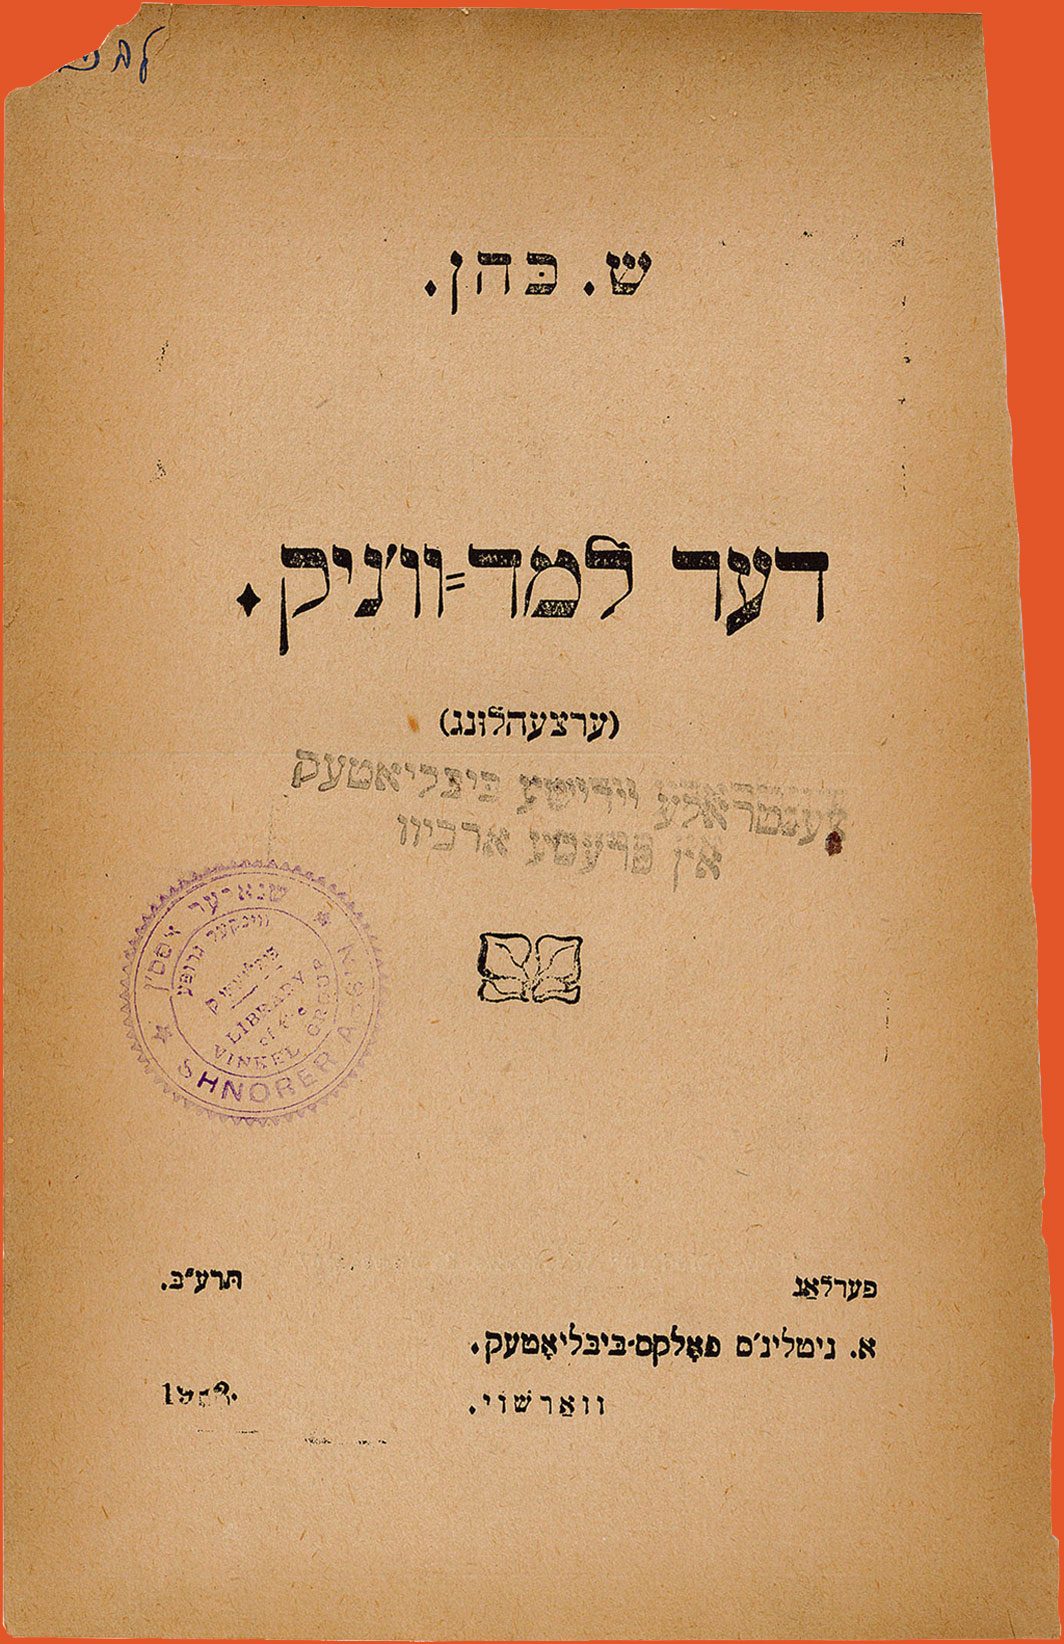 In Yiddish - title page of The Lamed-vovnik